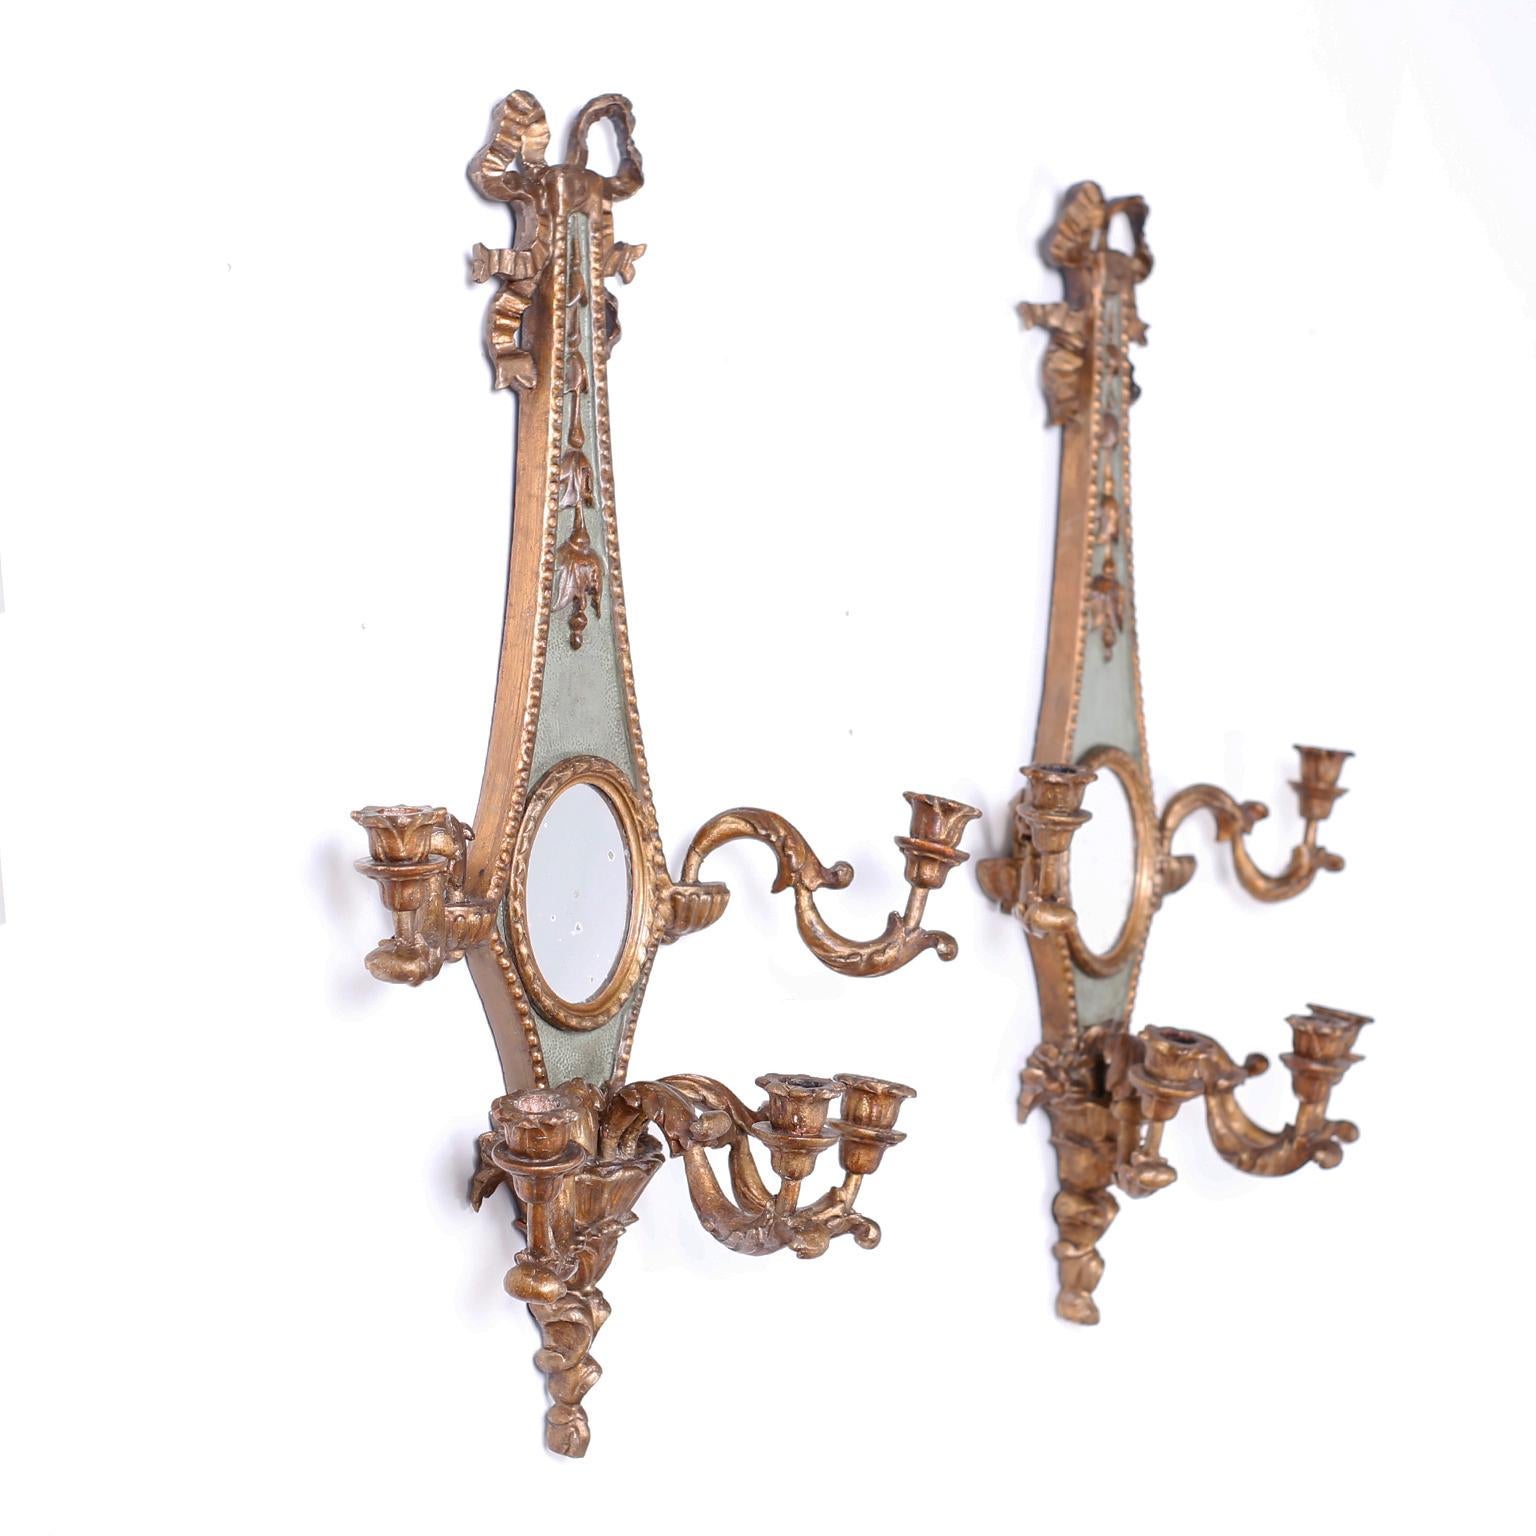 Pair of 19th century Italian five light carved wood wall sconces with a graceful classical form and having distressed oval mirrors on a green painted background. The carved ribbons, flowers and candle stick arms are water gilt with an age acquired